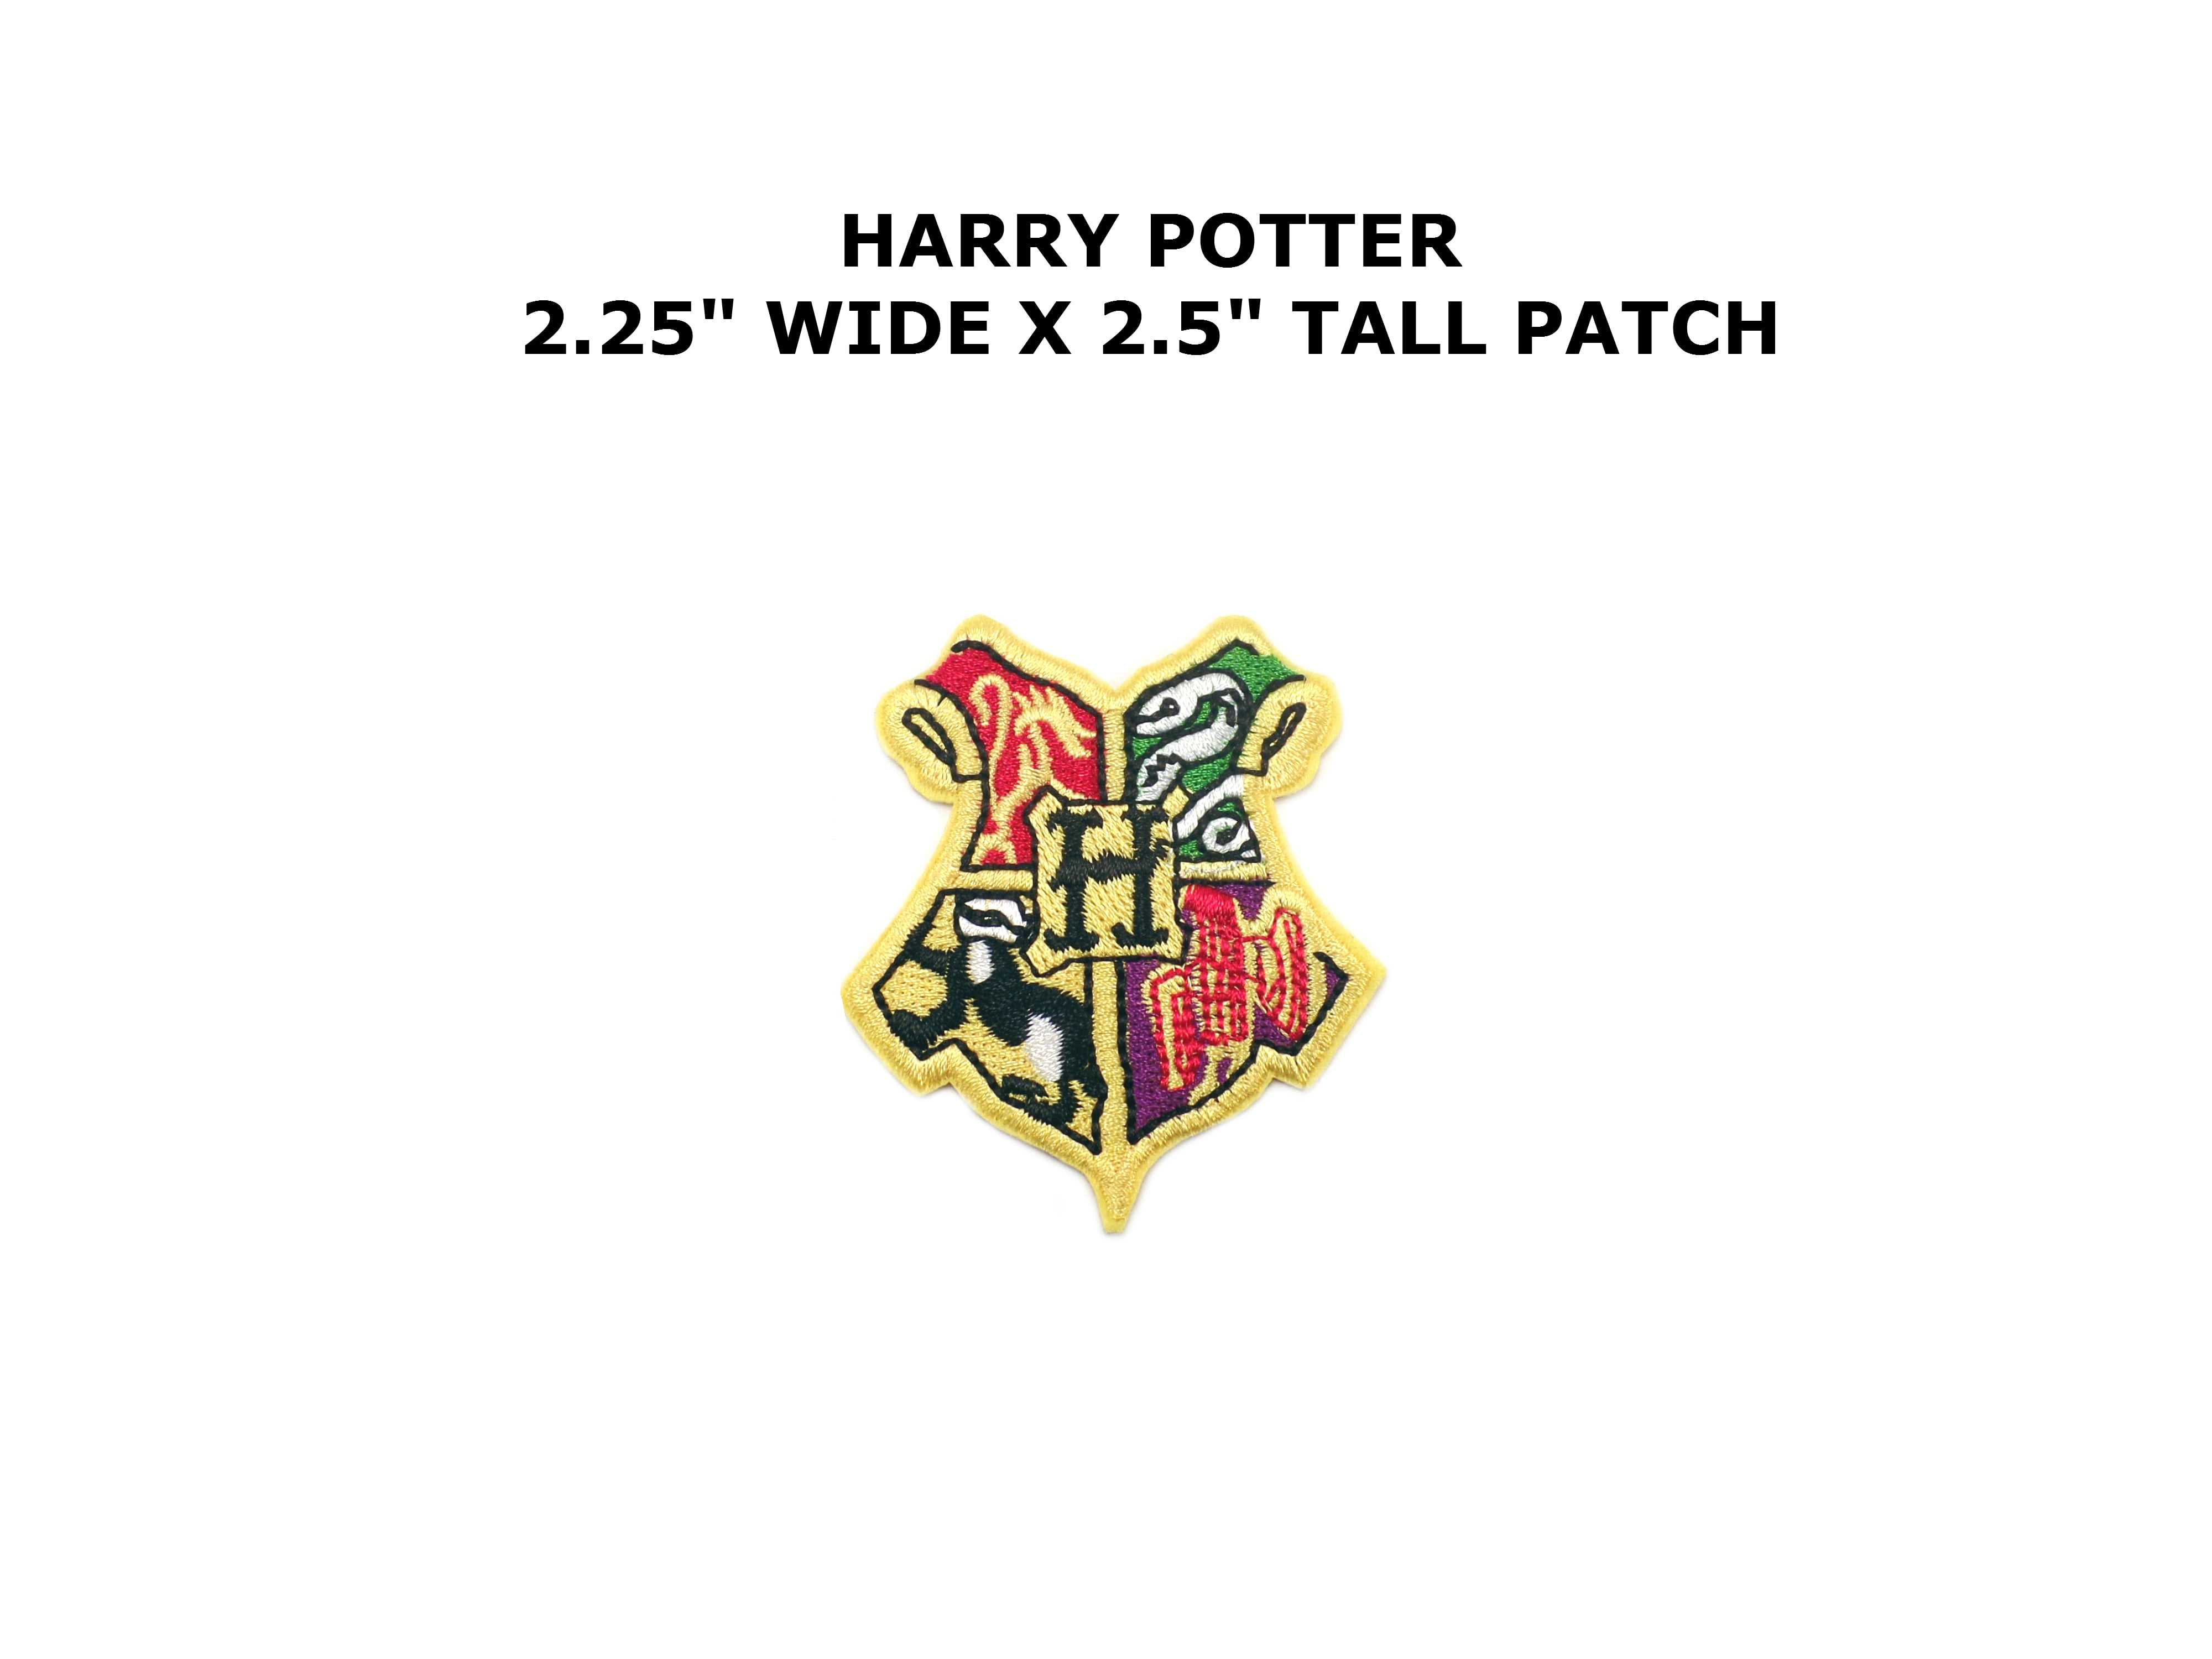 Harry Potter Movie Comics Embroidered Iron On Sew On Patch Badge For Clothes etc 